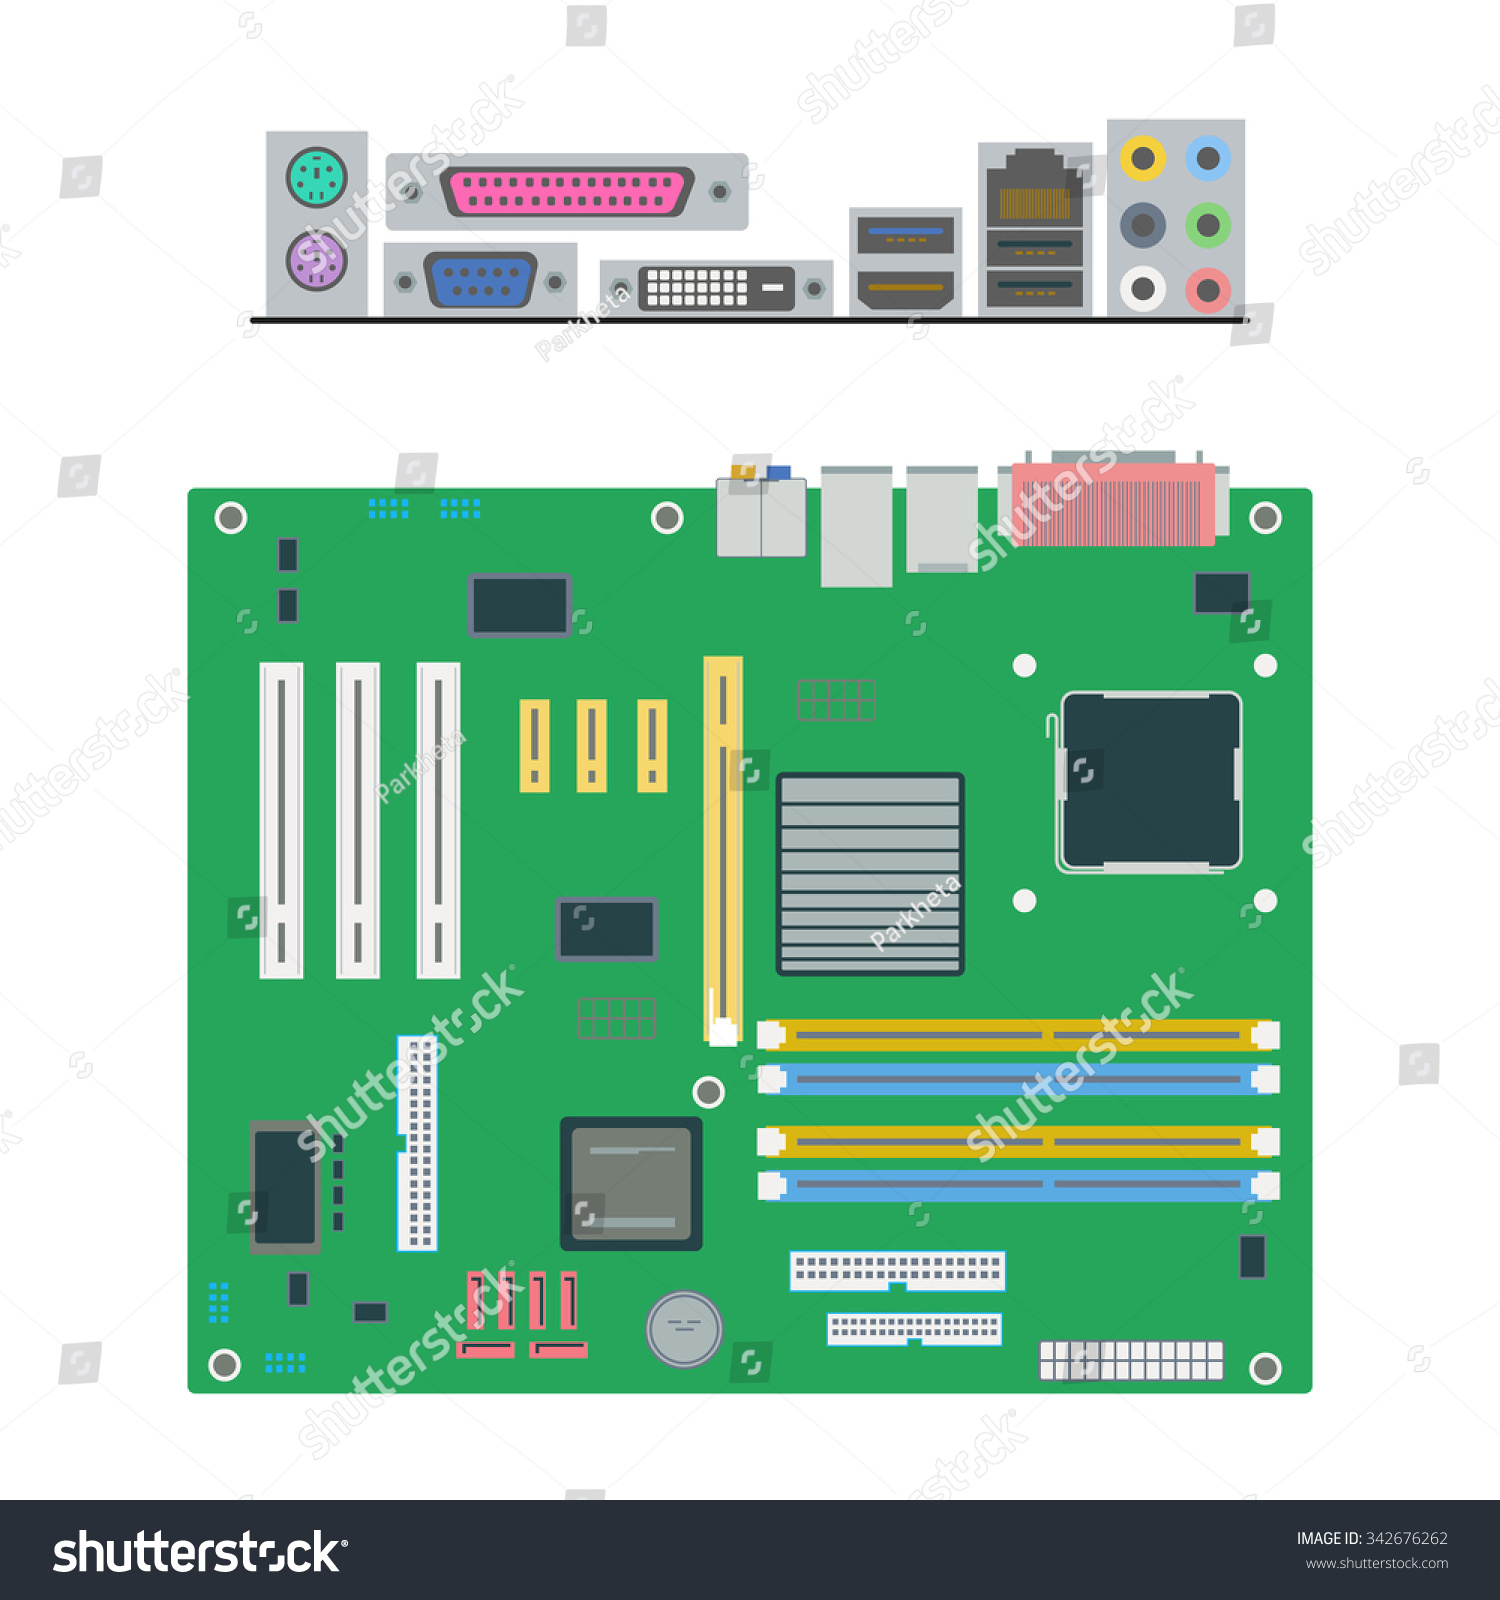 Download Motherboard Motherboard Icon On White Background Stock ...